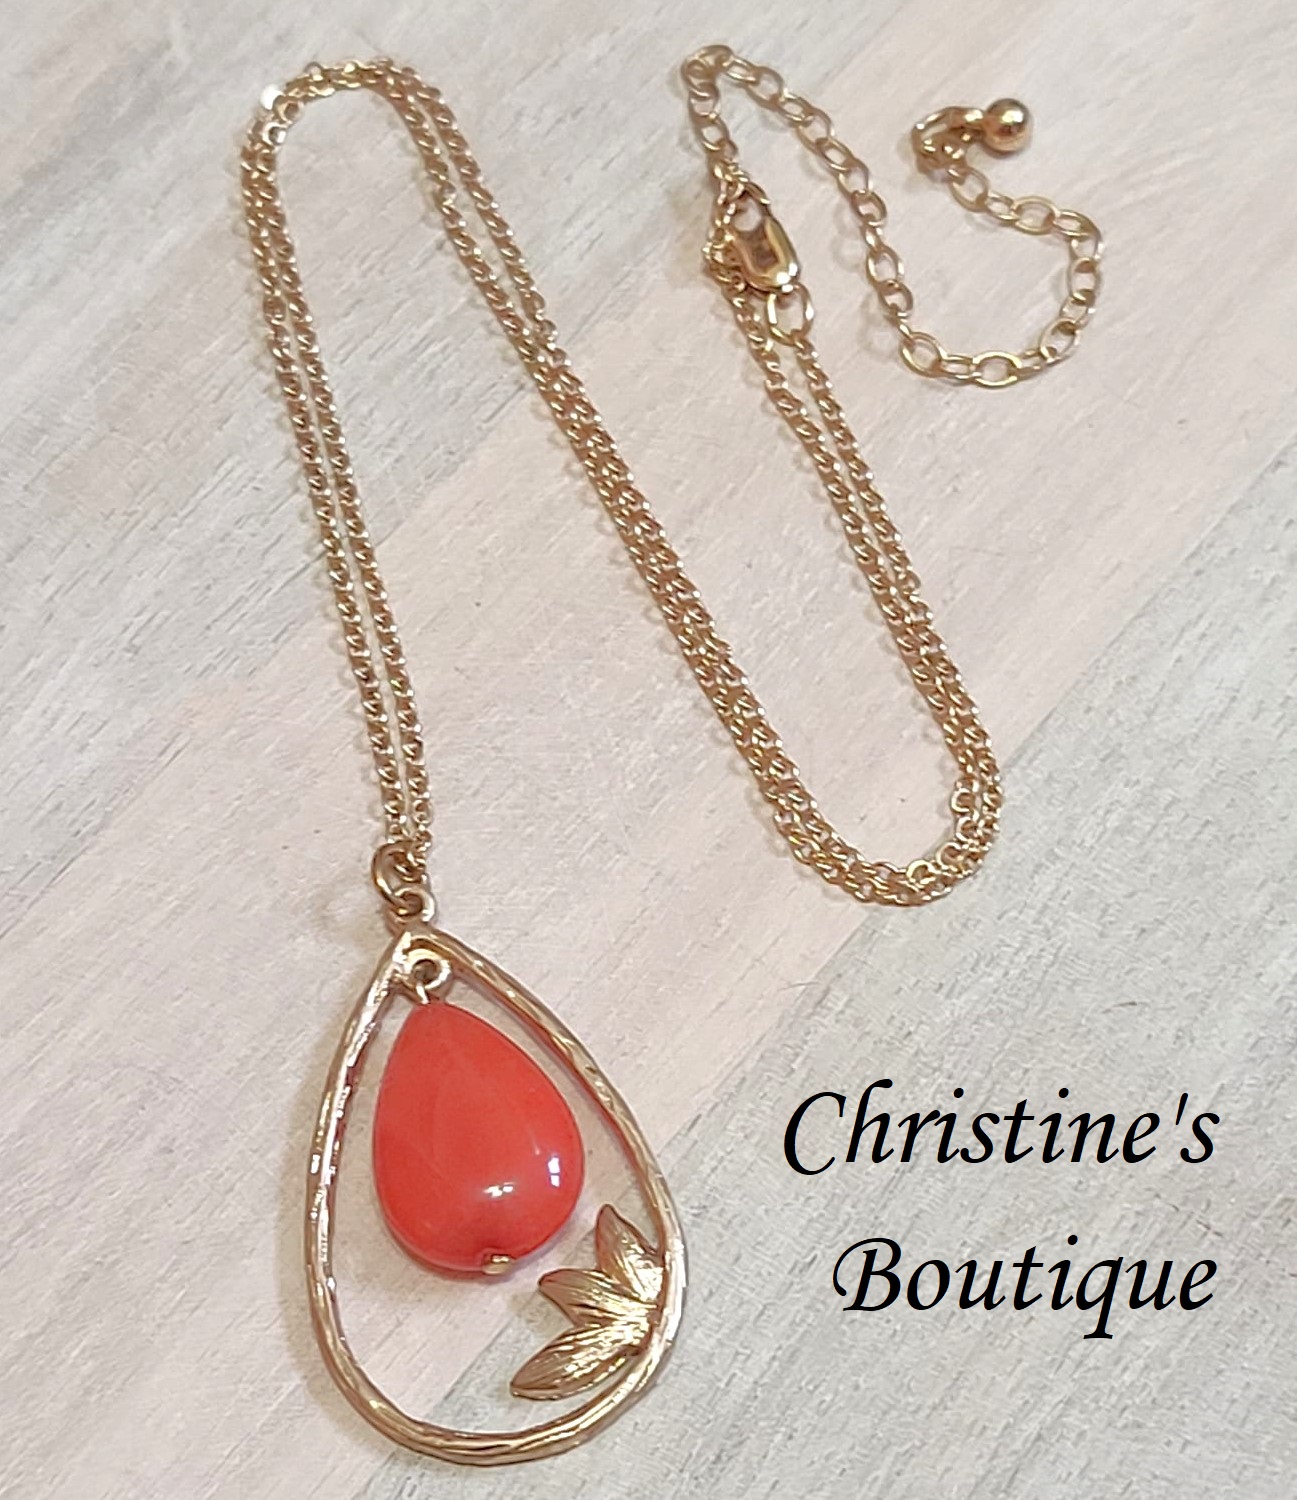 Gemstone pendant necklace, coral orange dyed quartz, with leaf pattern on chain - Click Image to Close